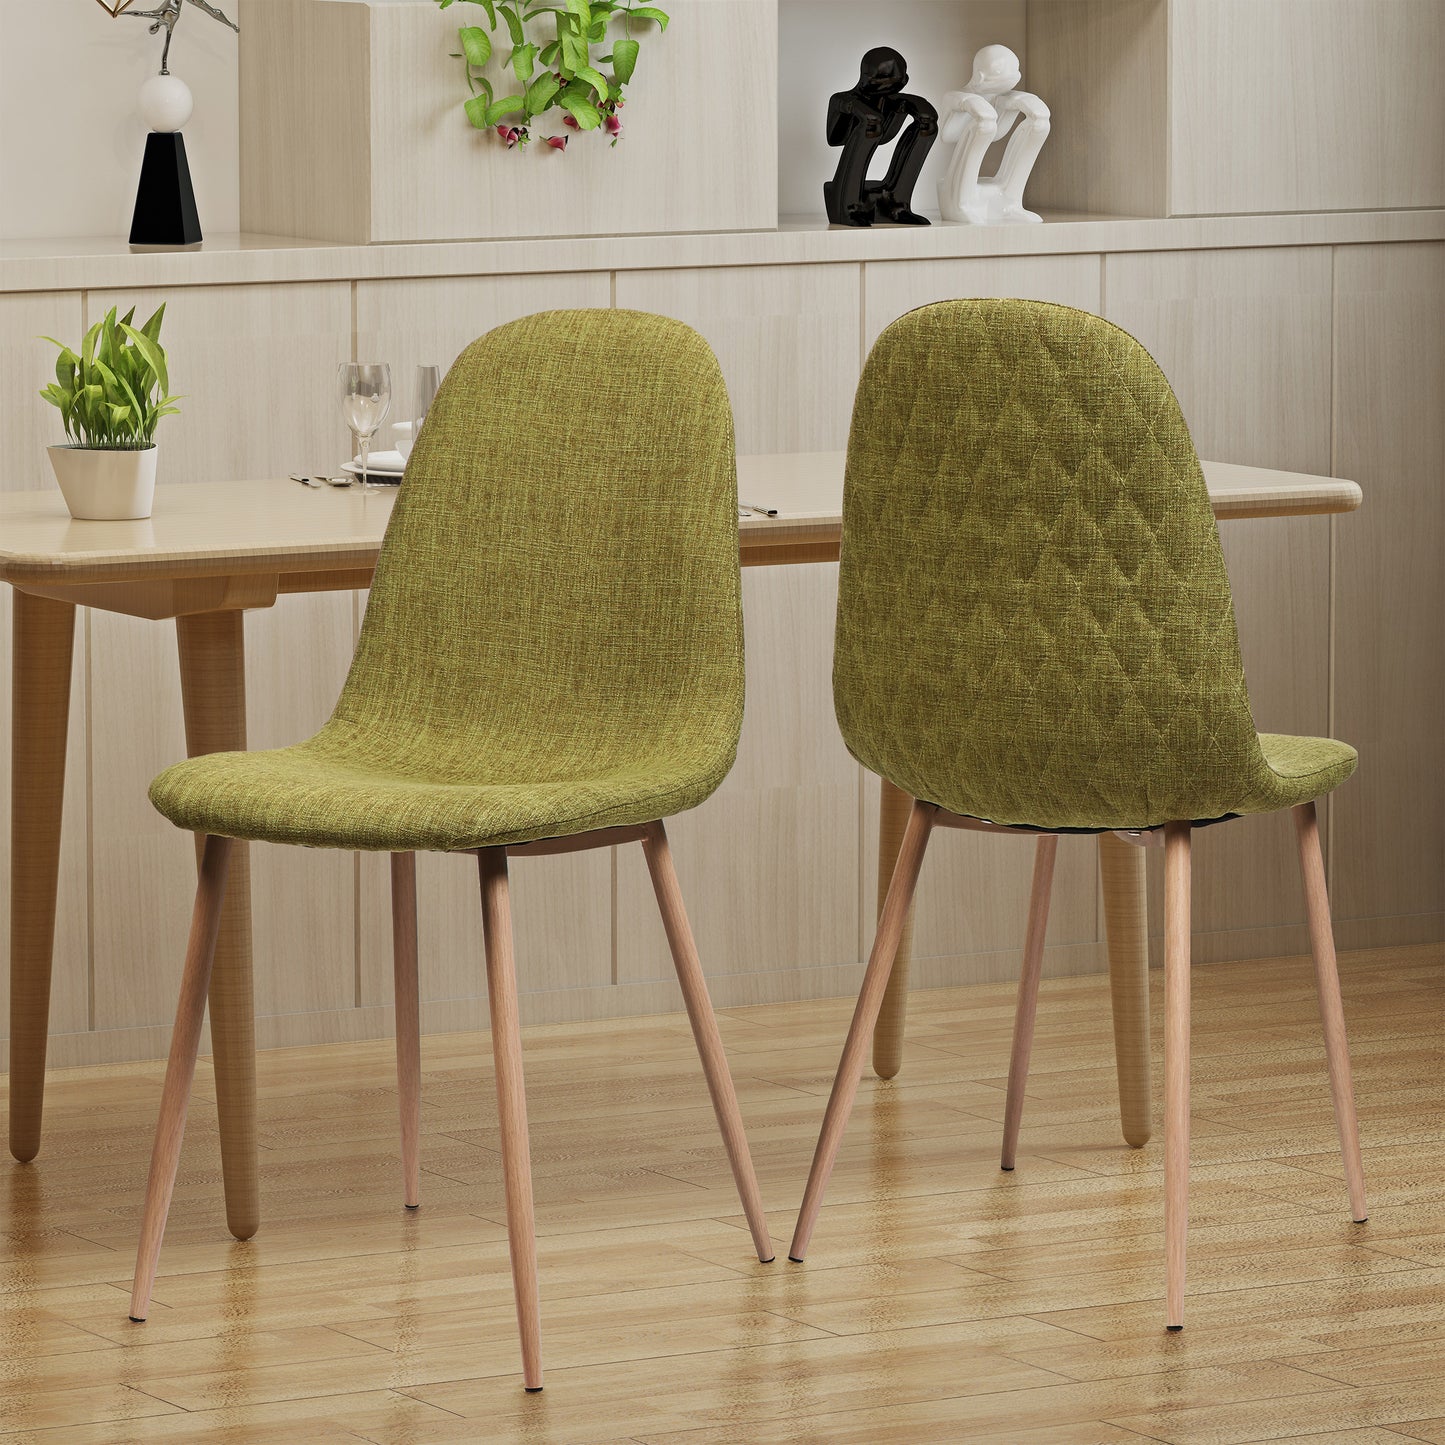 Sherdan Mid Century Fabric Dining Chairs with Wood Finished Legs - Set of 2